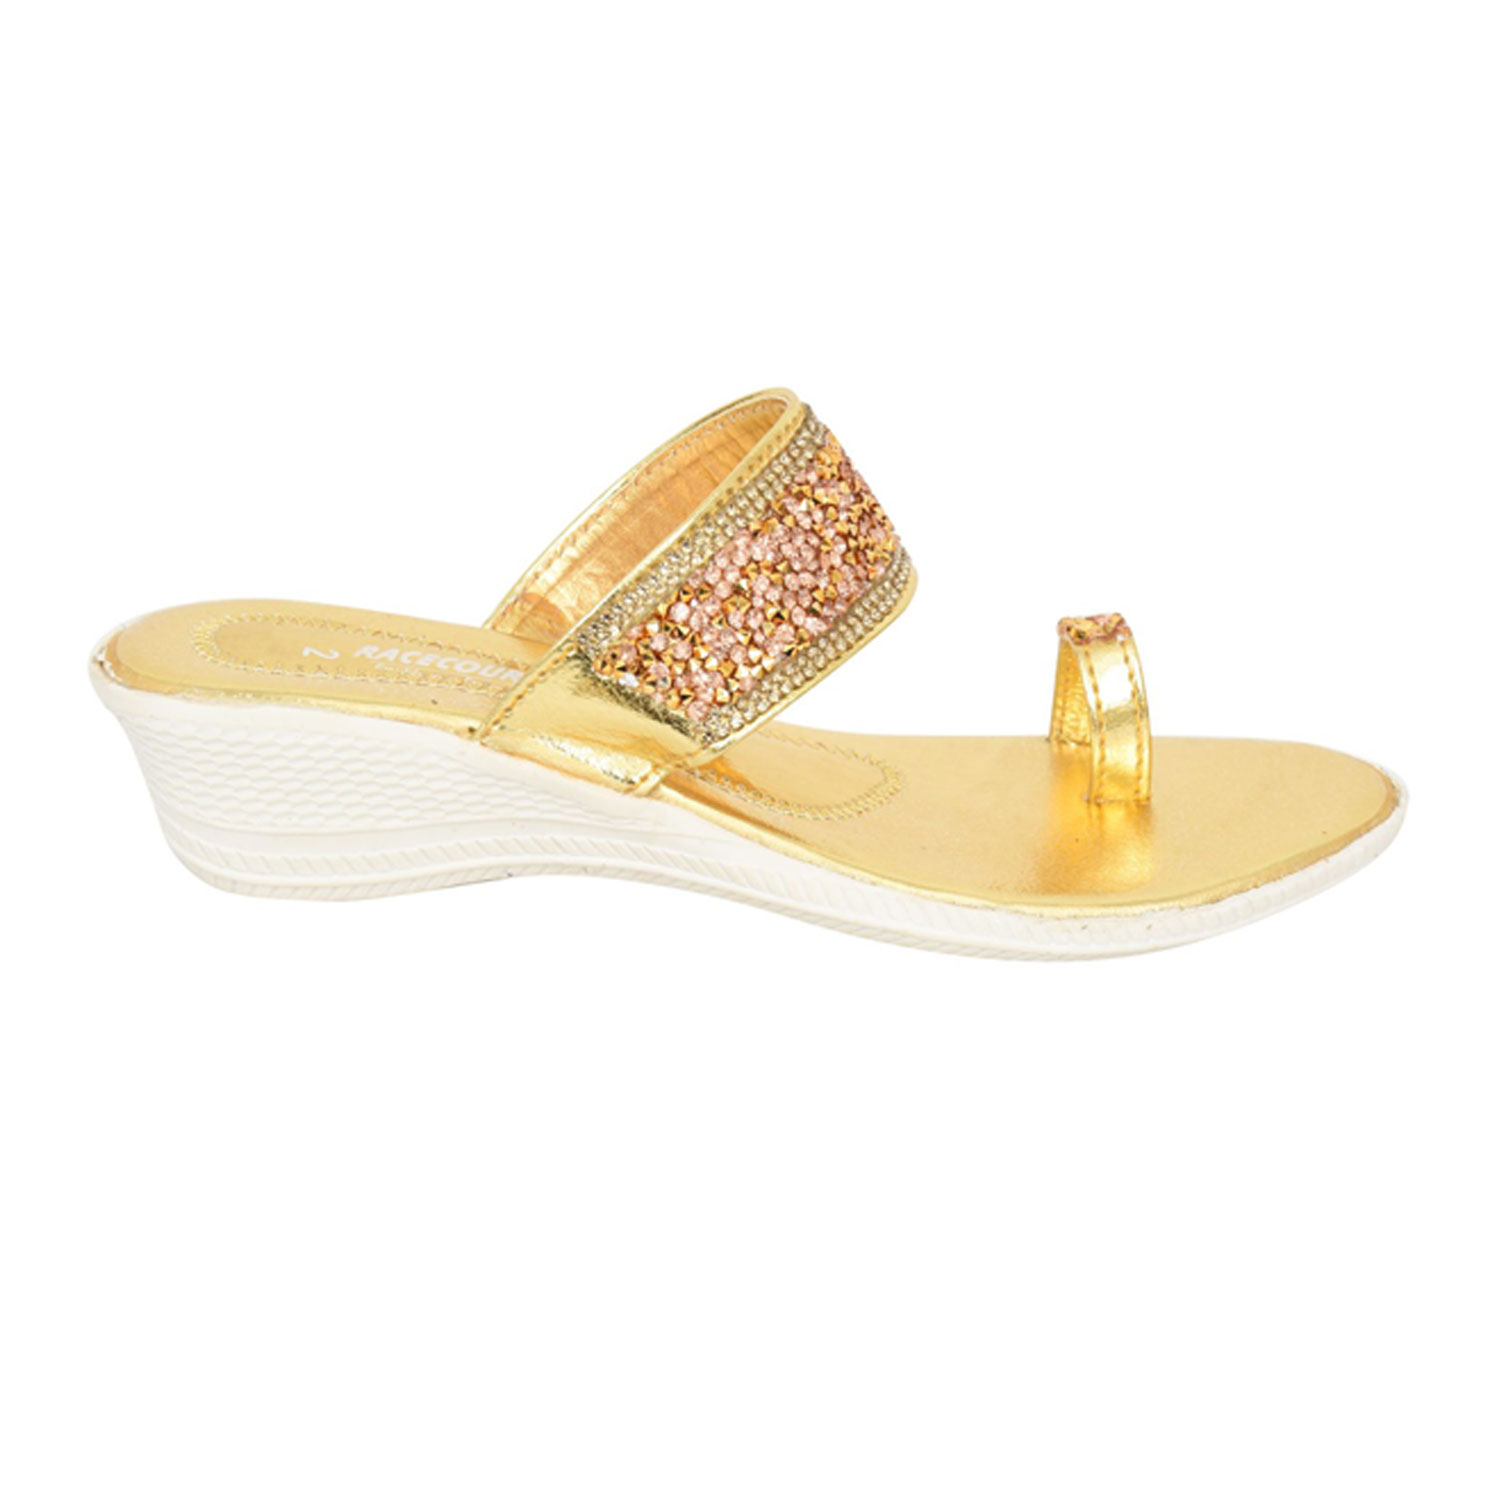 Racecourse Girl's Wedges Heel Ready Made China Upper Kadak Panja Partywear Sandal With the Heel Height of 1.5 Inch 3002 Golden(Pack of 8)